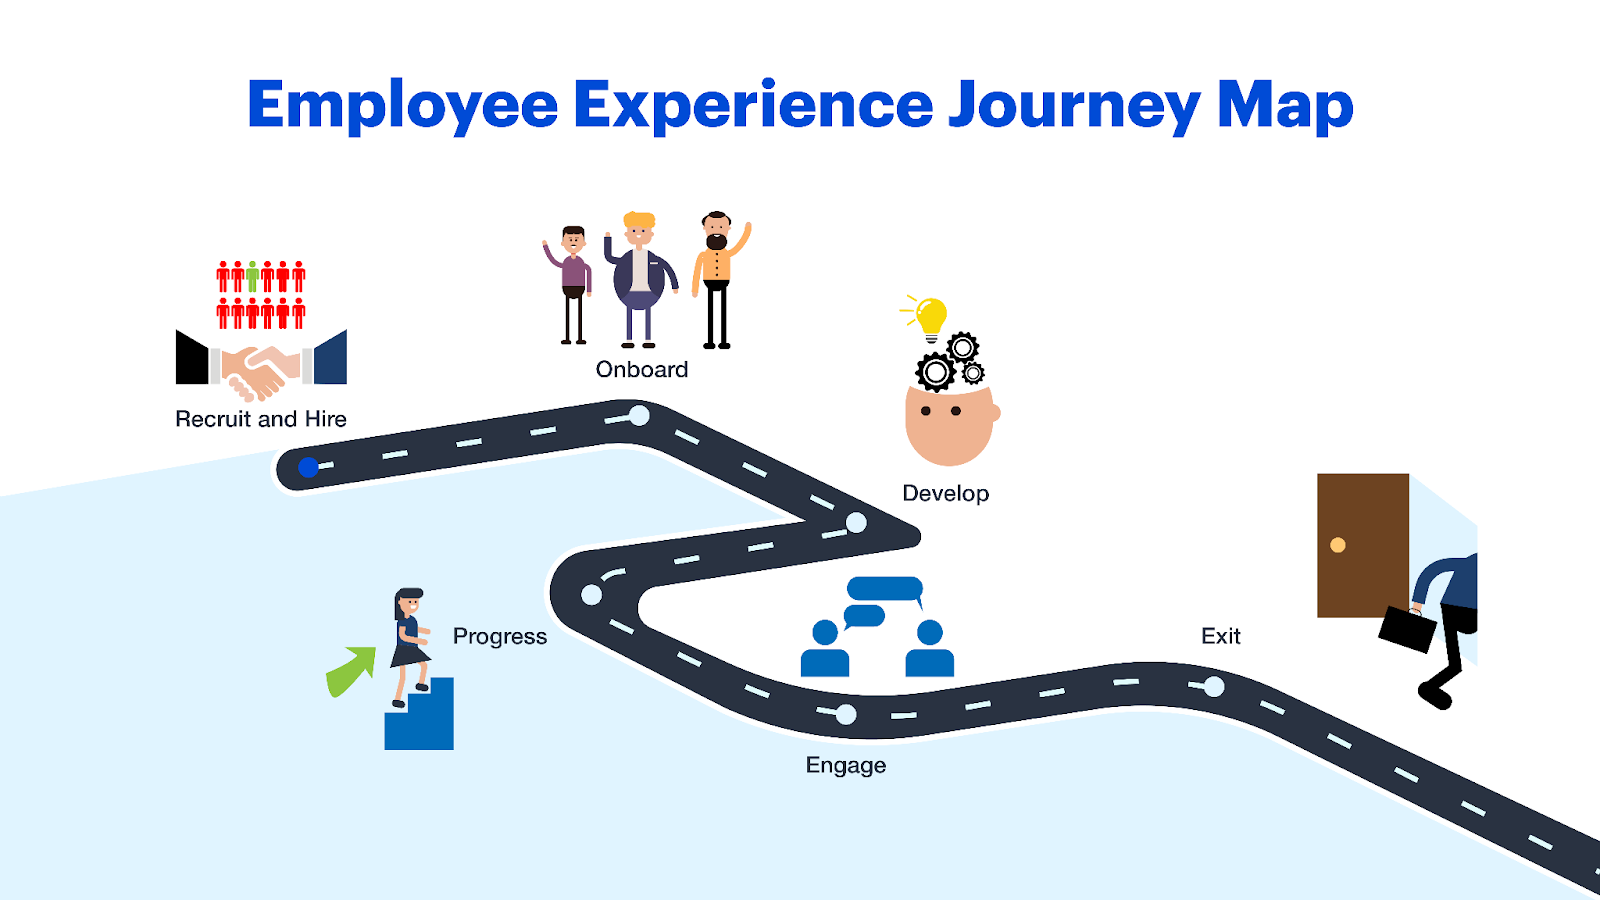 Focus on creating a better employee experience journey map.